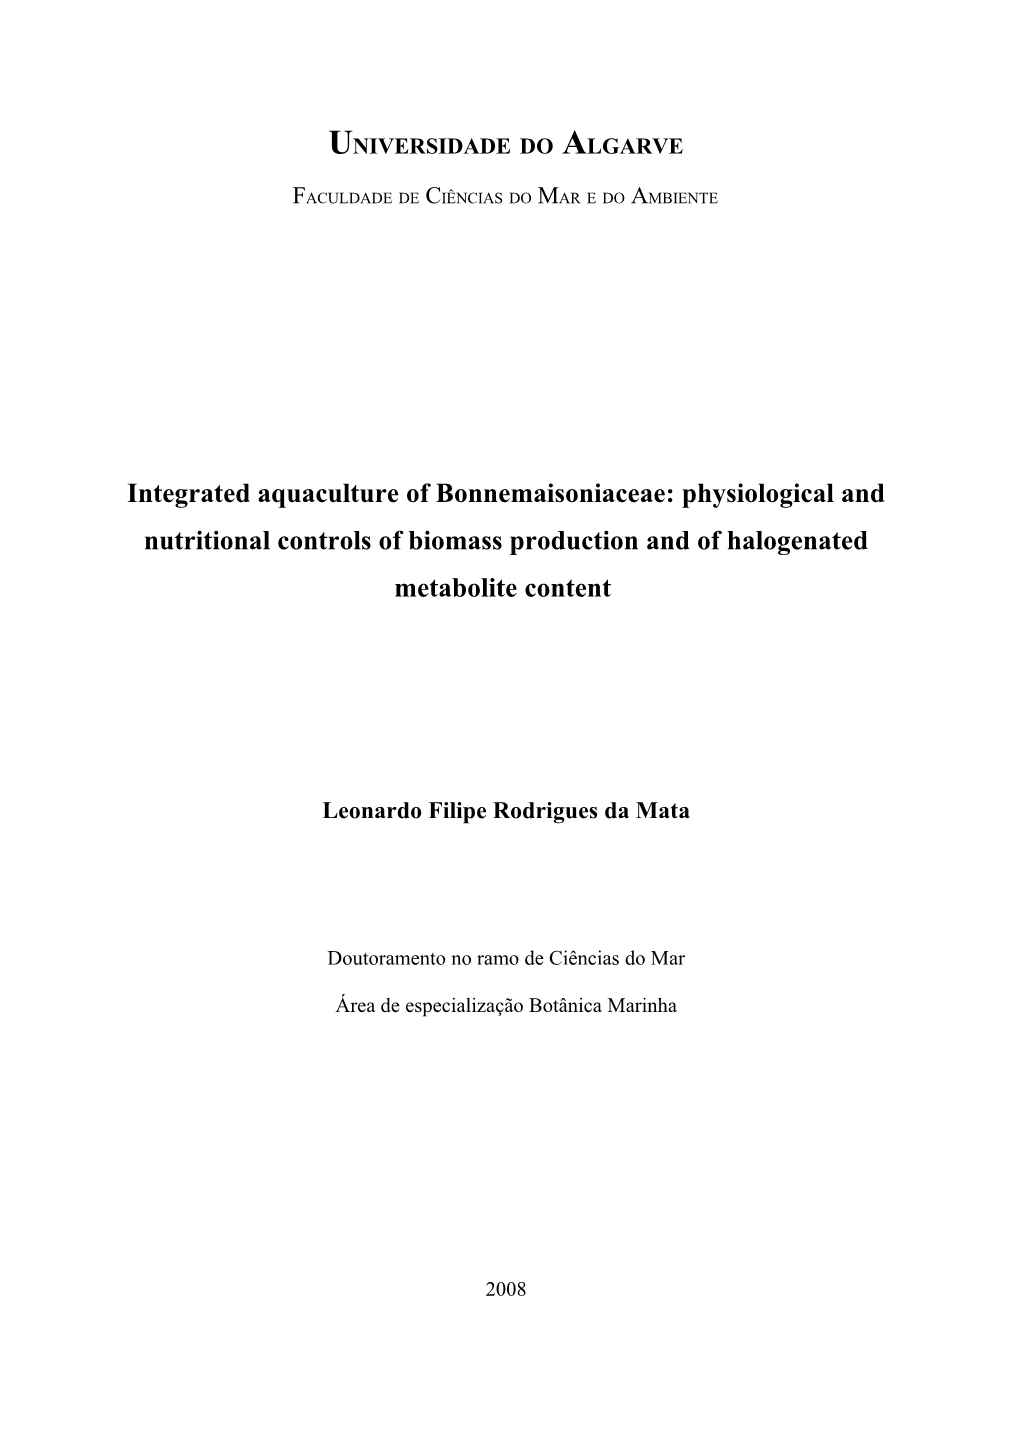 Integrated Aquaculture of Bonnemaisoniaceae: Physiological and Nutritional Controls of Biomass Production and of Halogenated Metabolite Content